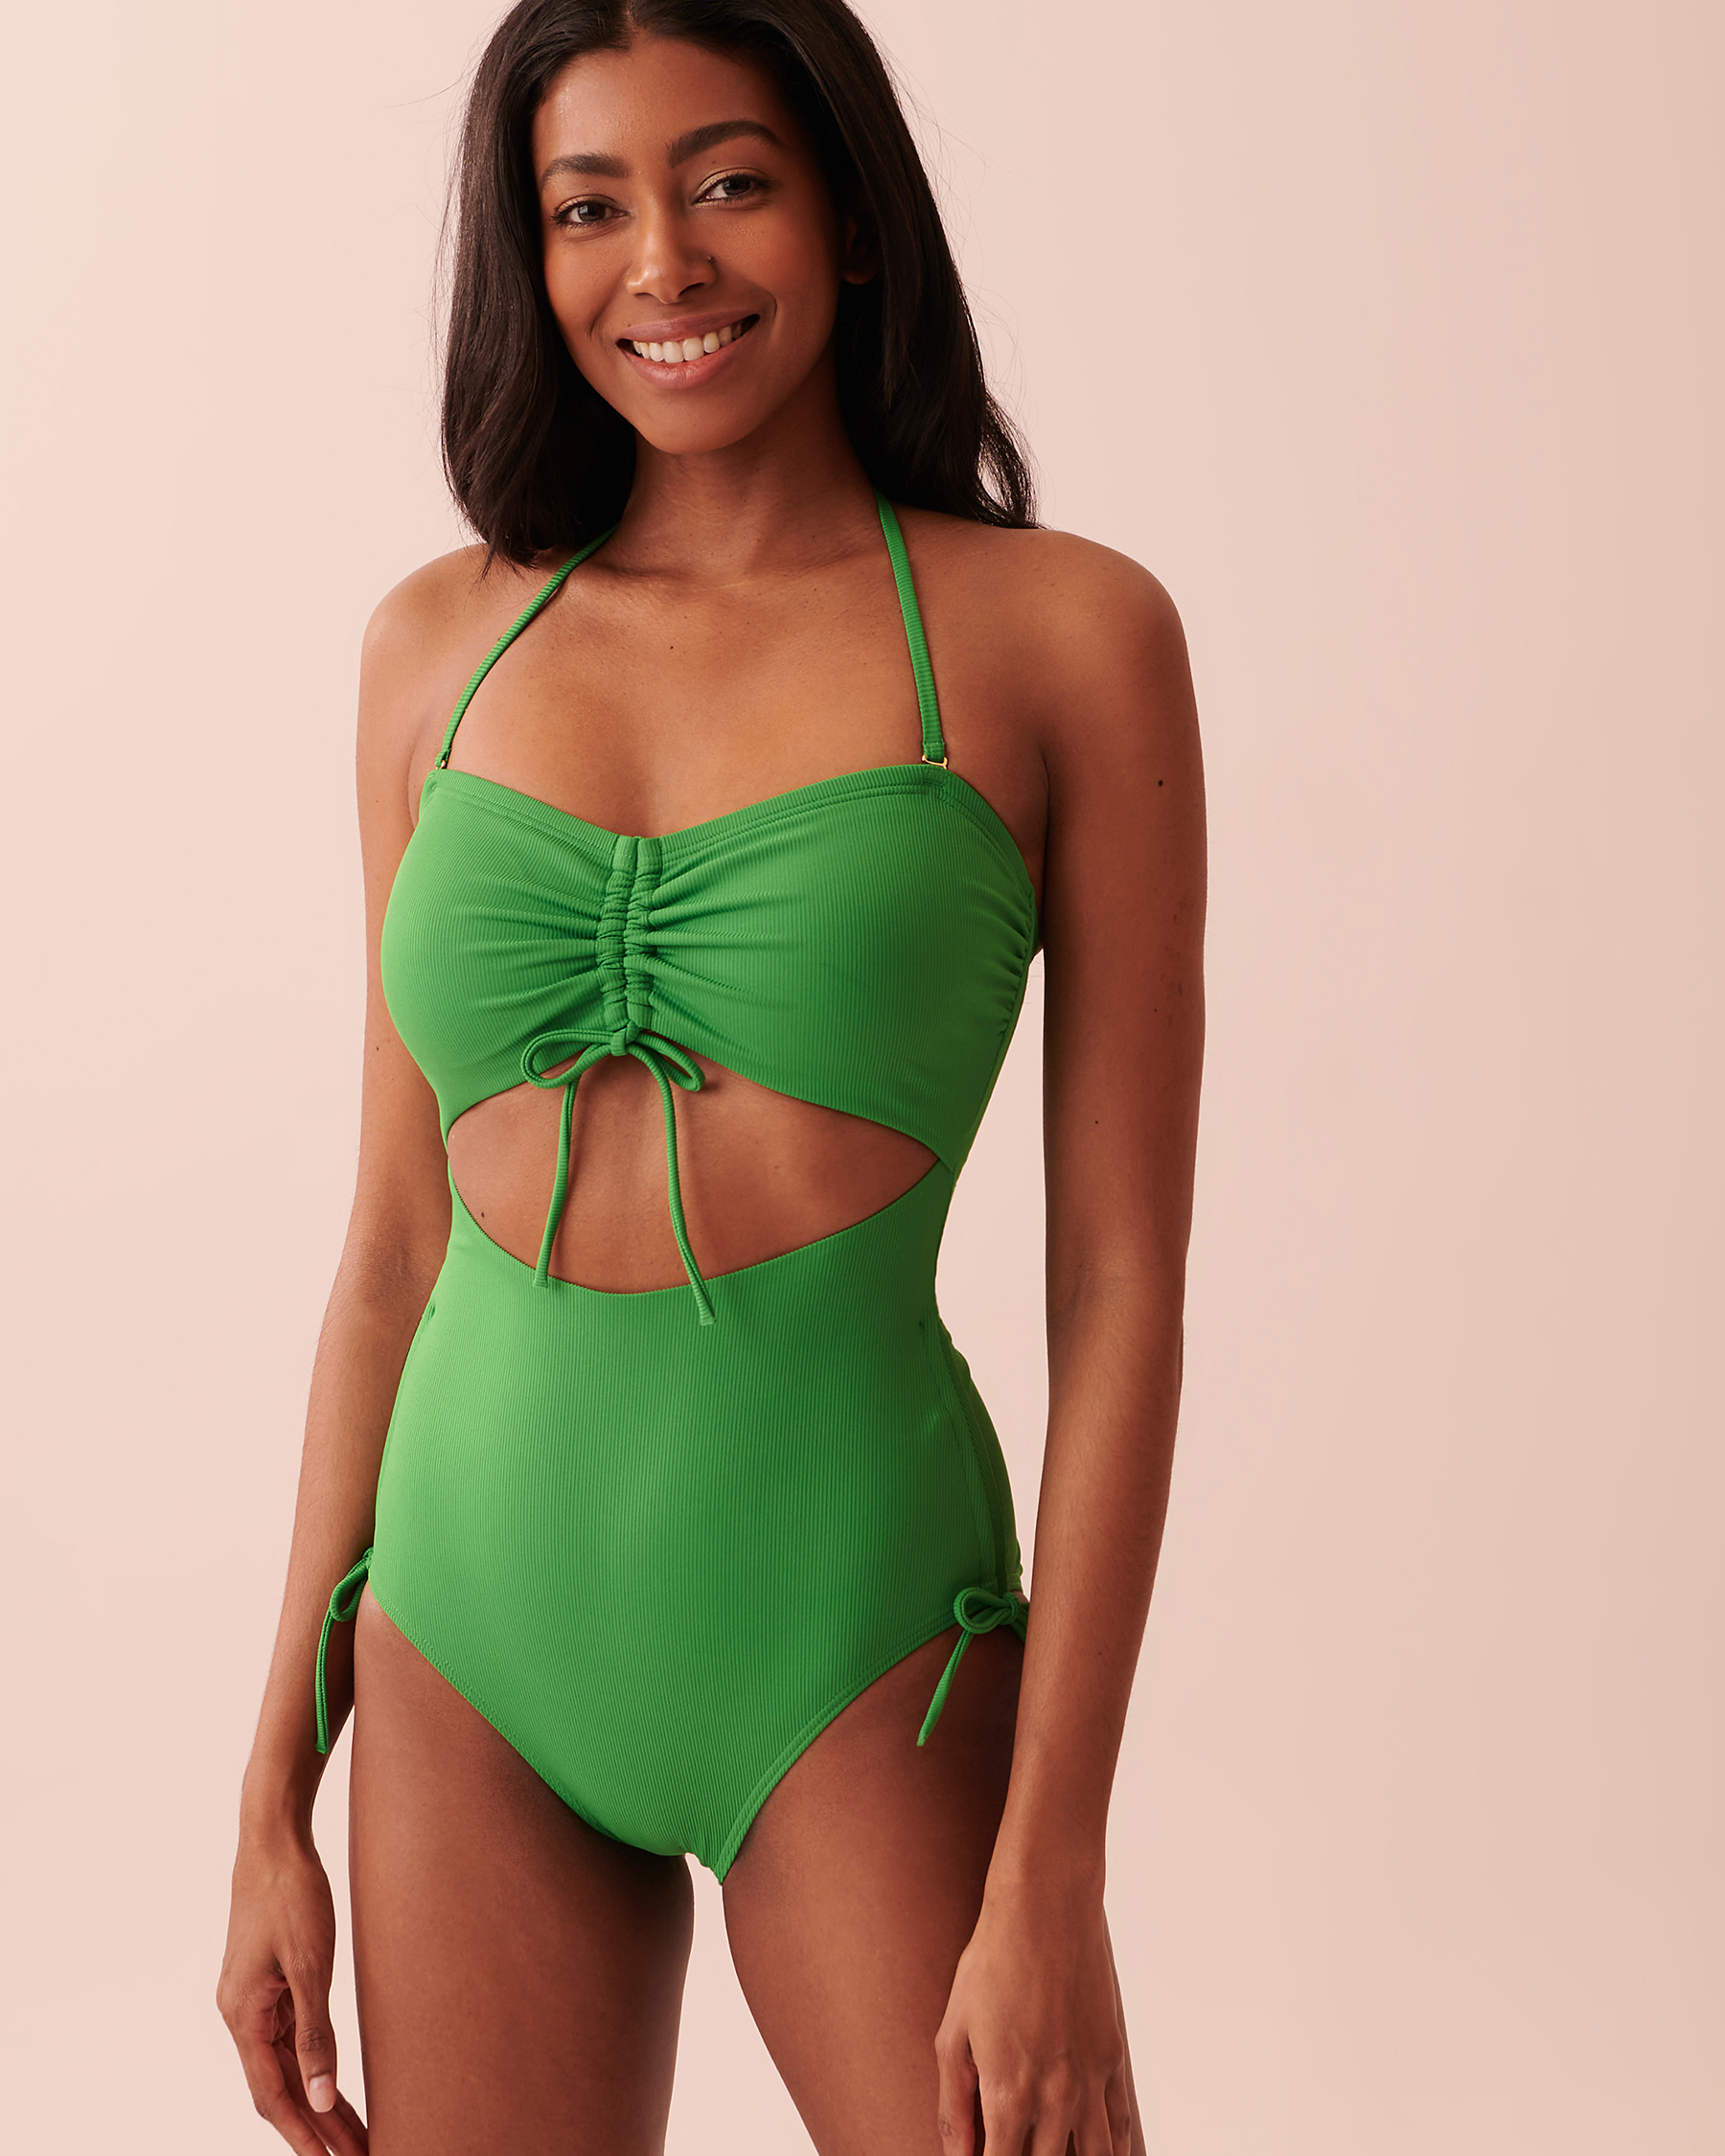 AQUAROSE ANITA Recycled Fibers Bandeau One-piece Swimsuit Forest green 70400097 - View3